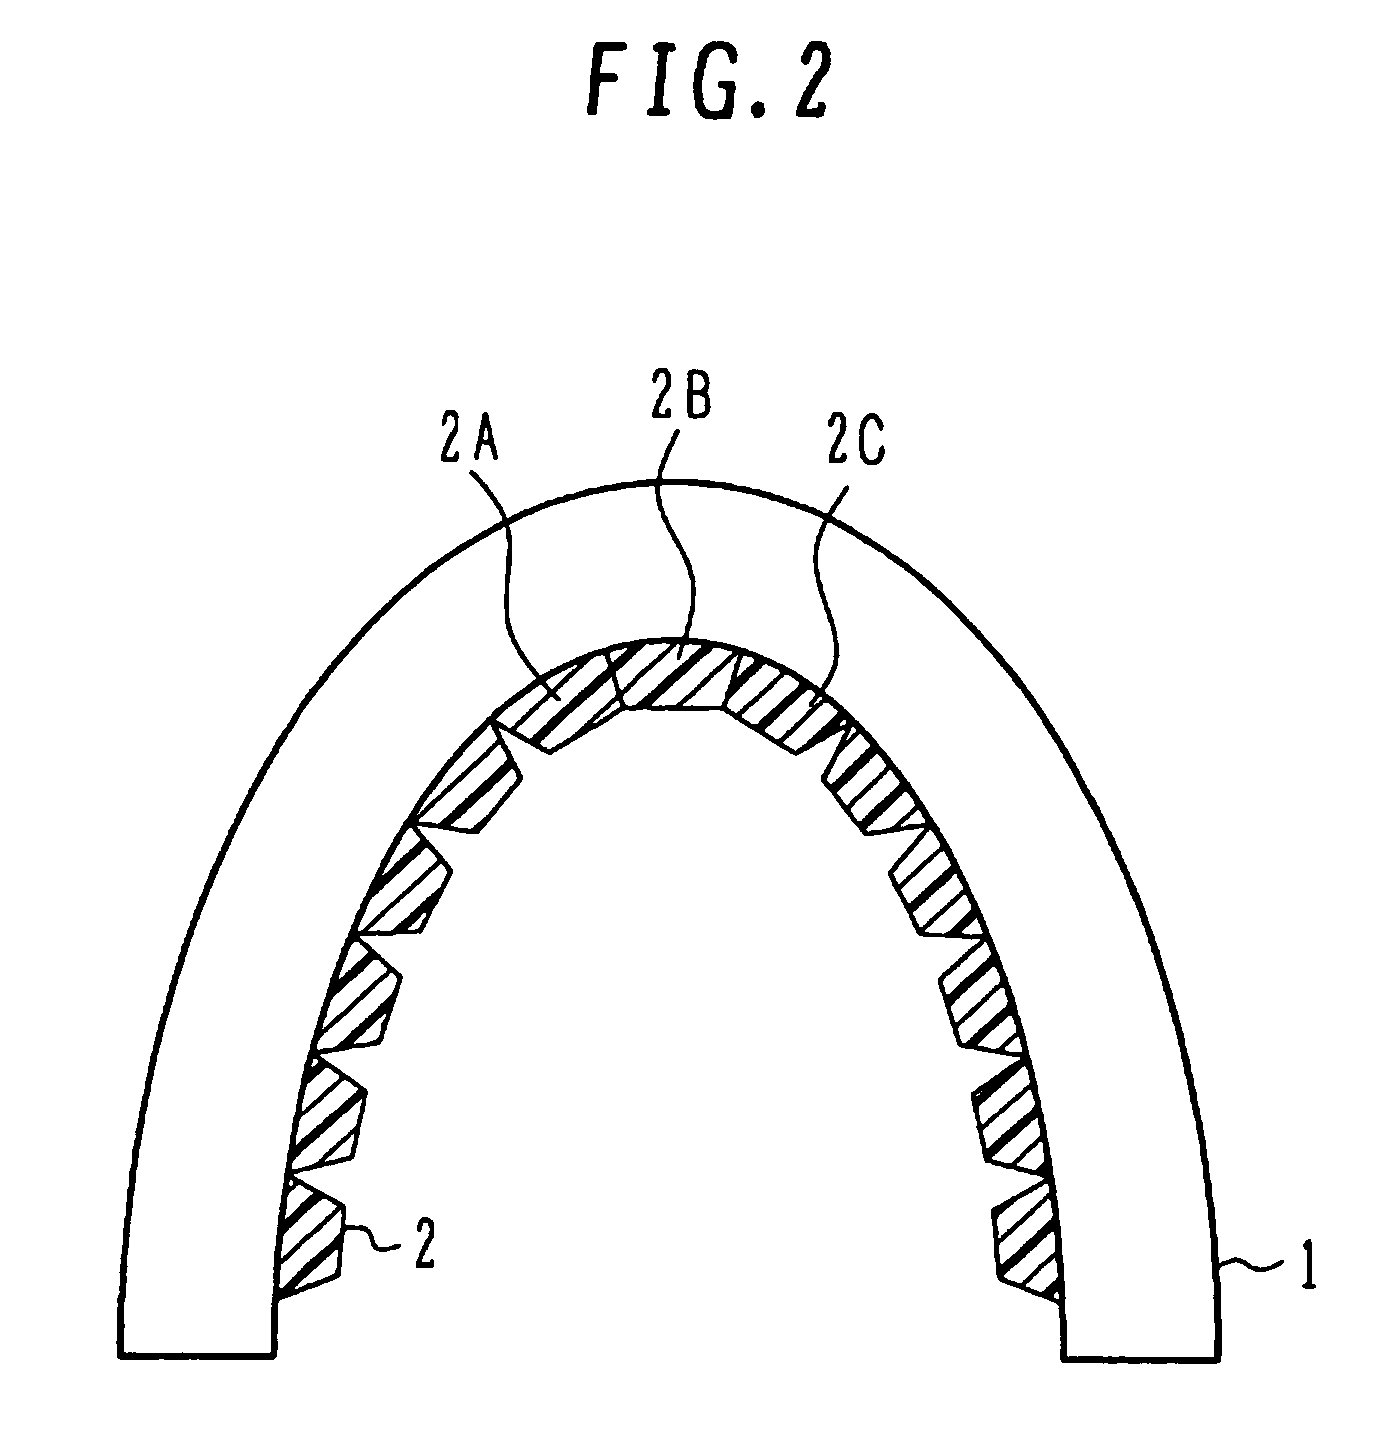 Flexible base material and flexible image-displaying device resistant to plastic deformation